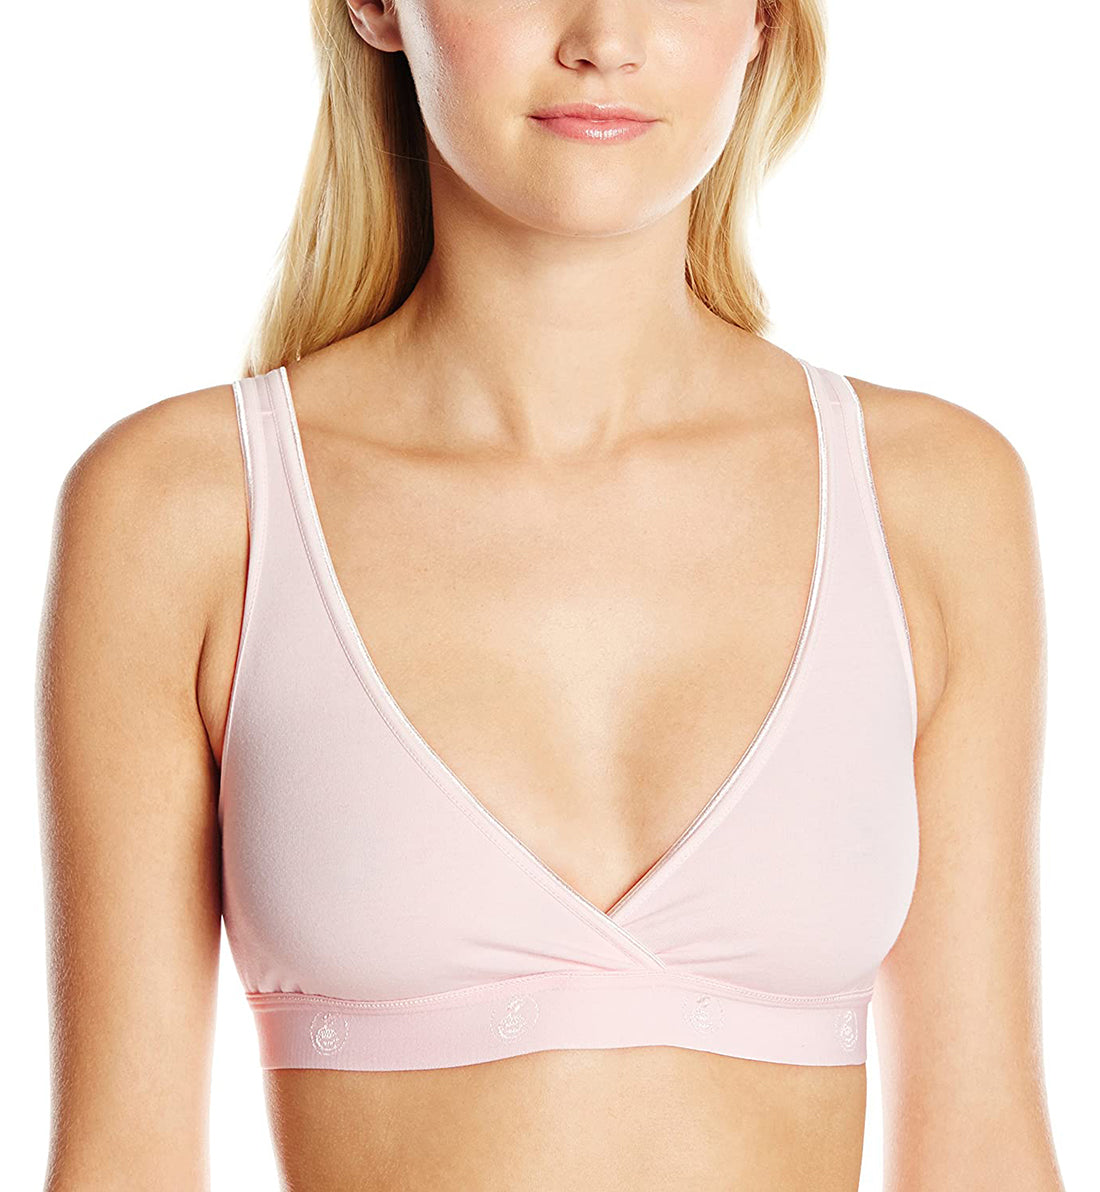 LLLI Cotton/Spandex Pull Over Sleep Bra (4150),Small,Pink - Pink,Small